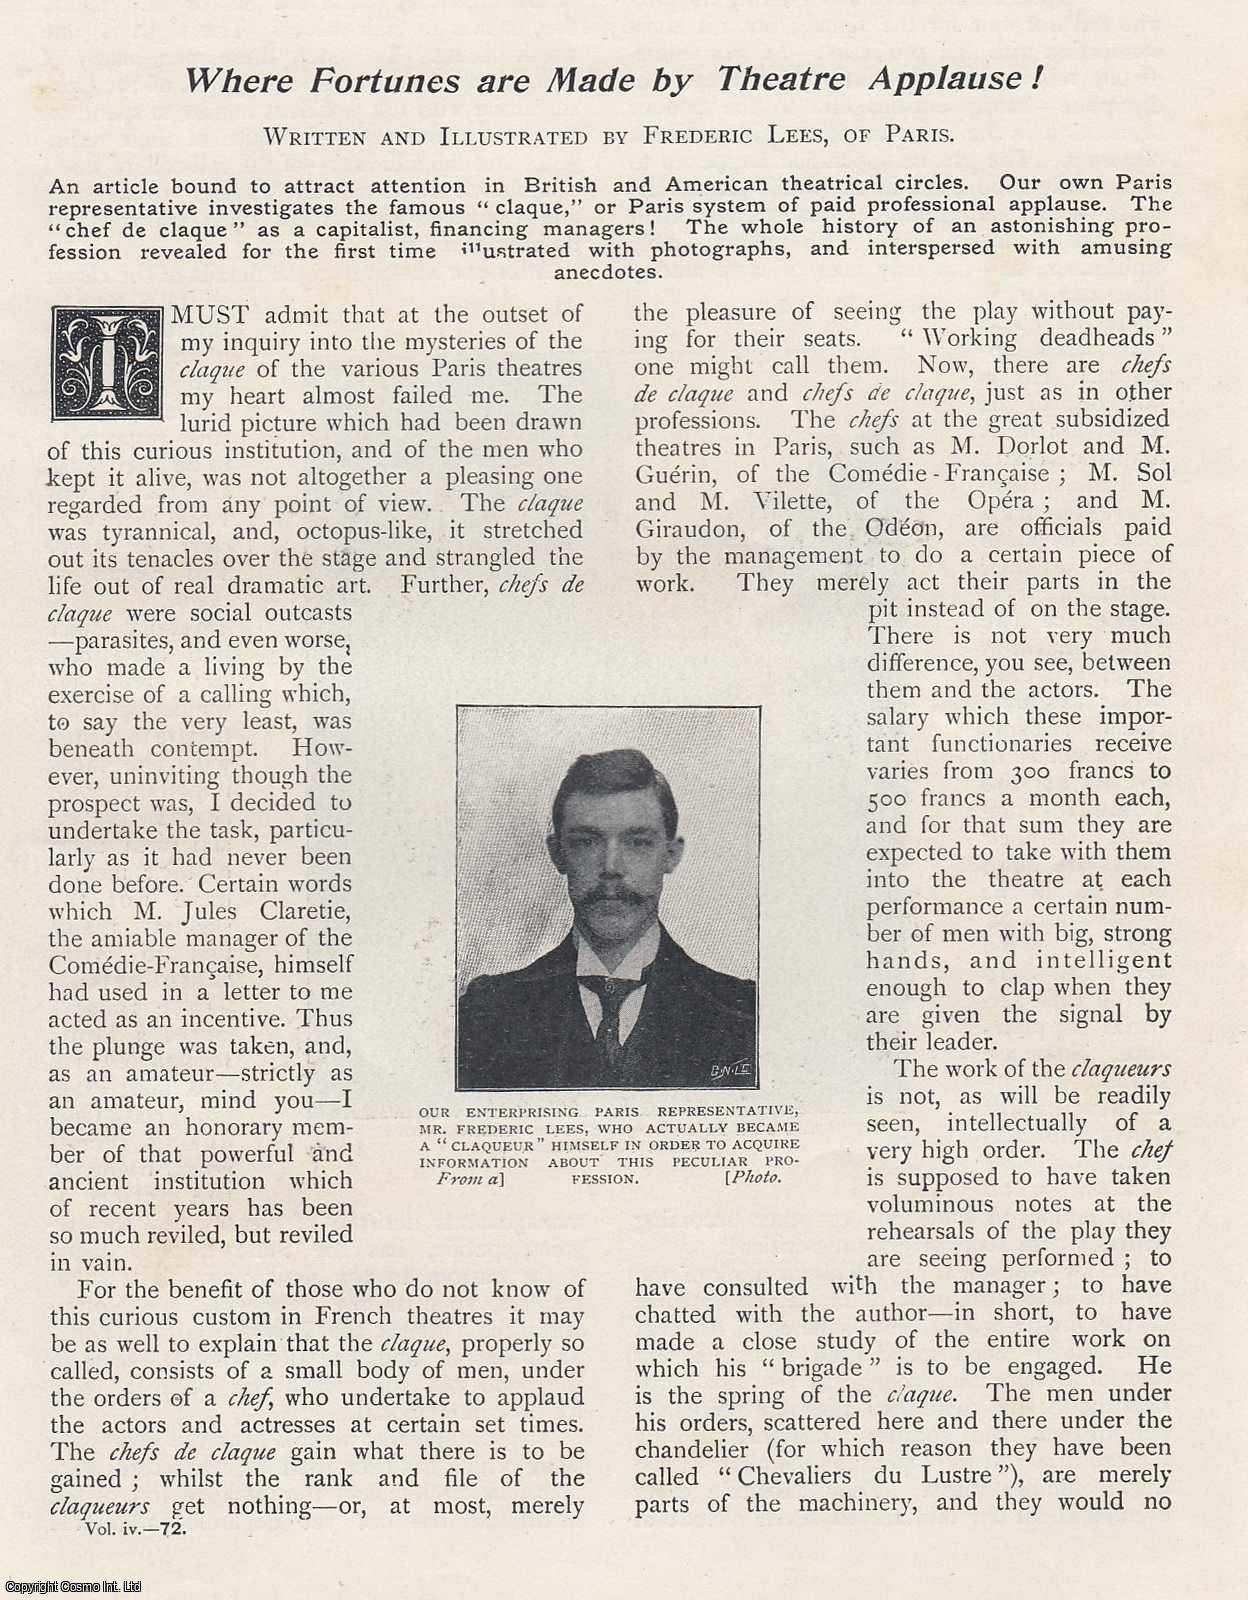 Frederic Lees - Where Fortunes are Made by Theatre Applause. The Paris system of paid professional applause. An uncommon original article from the Wide World Magazine, 1900.